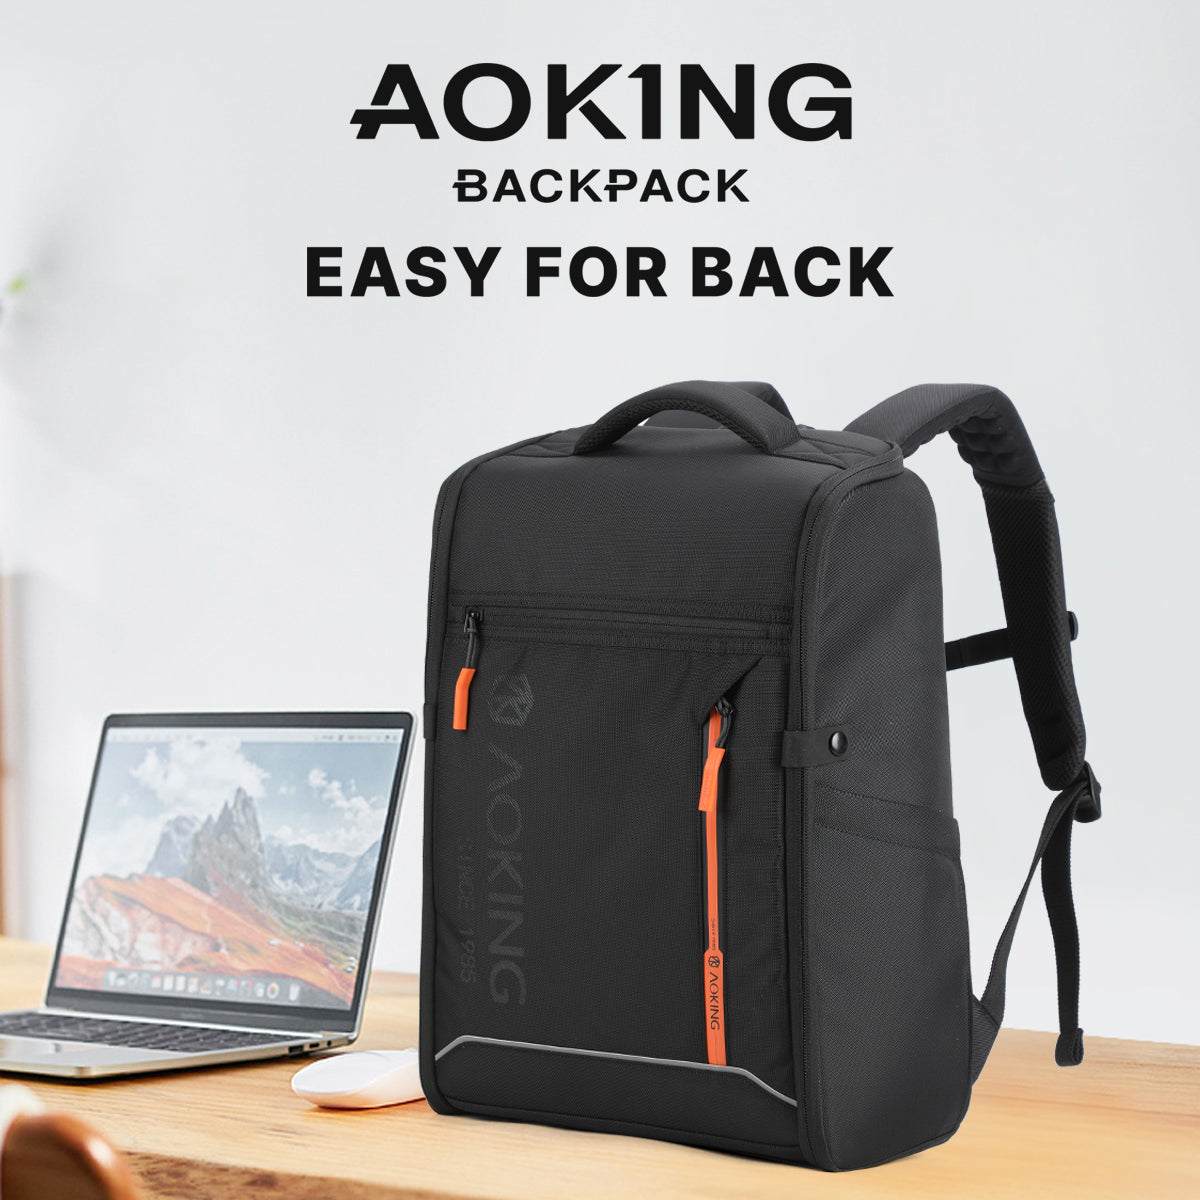 AOKING  SCHOOL SMART SPINE PROTECTION LAPTOP BACKPACK - SN1406